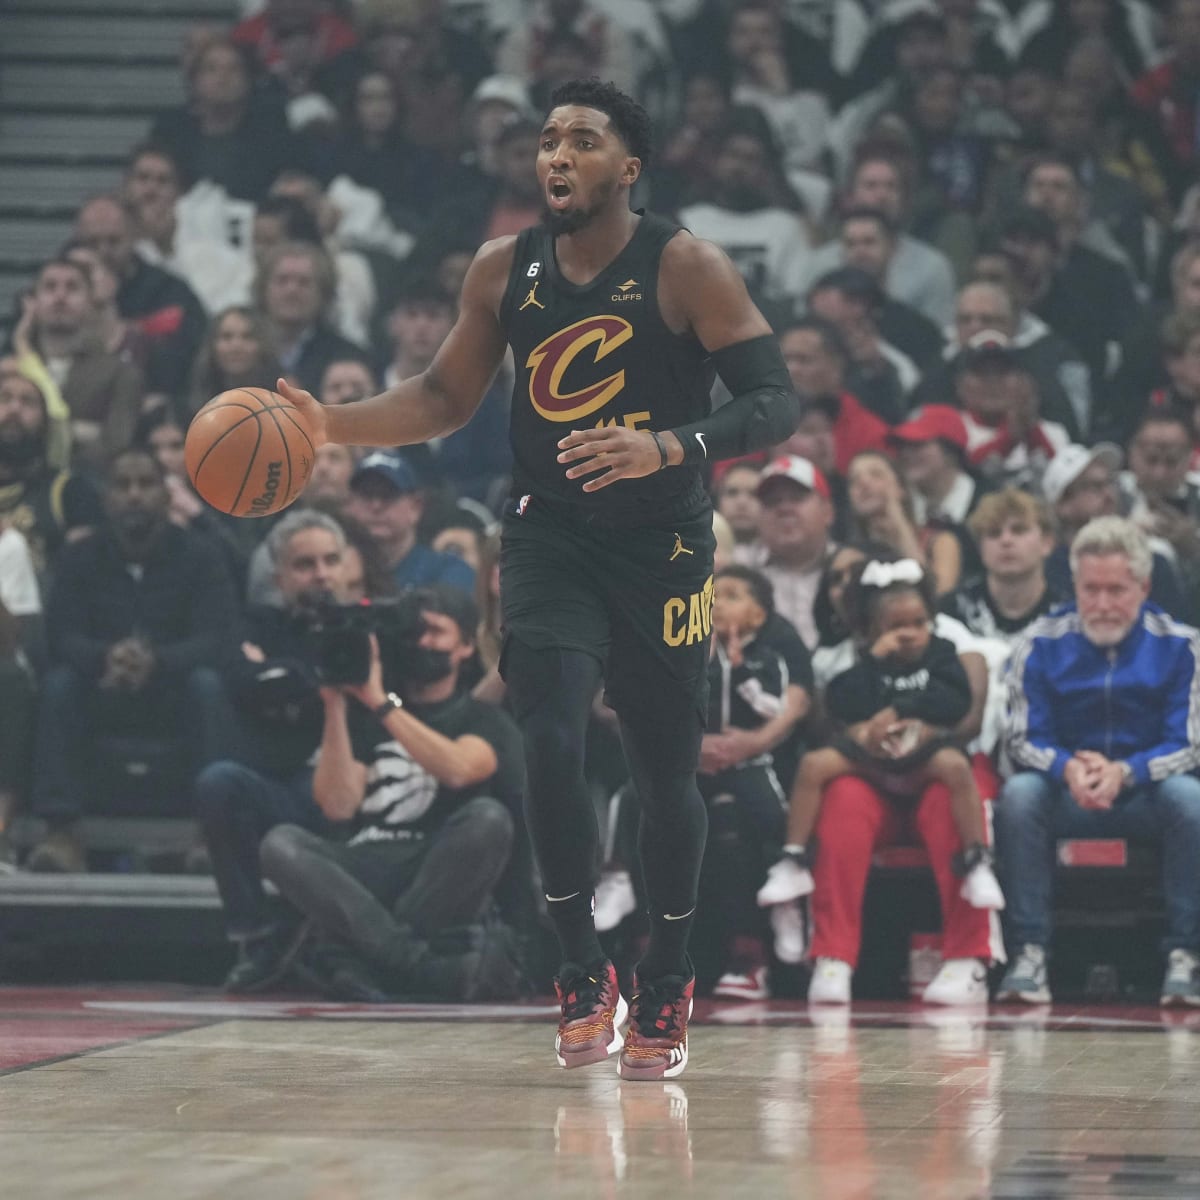 How a baseball injury led Connecticut native Donovan Mitchell to